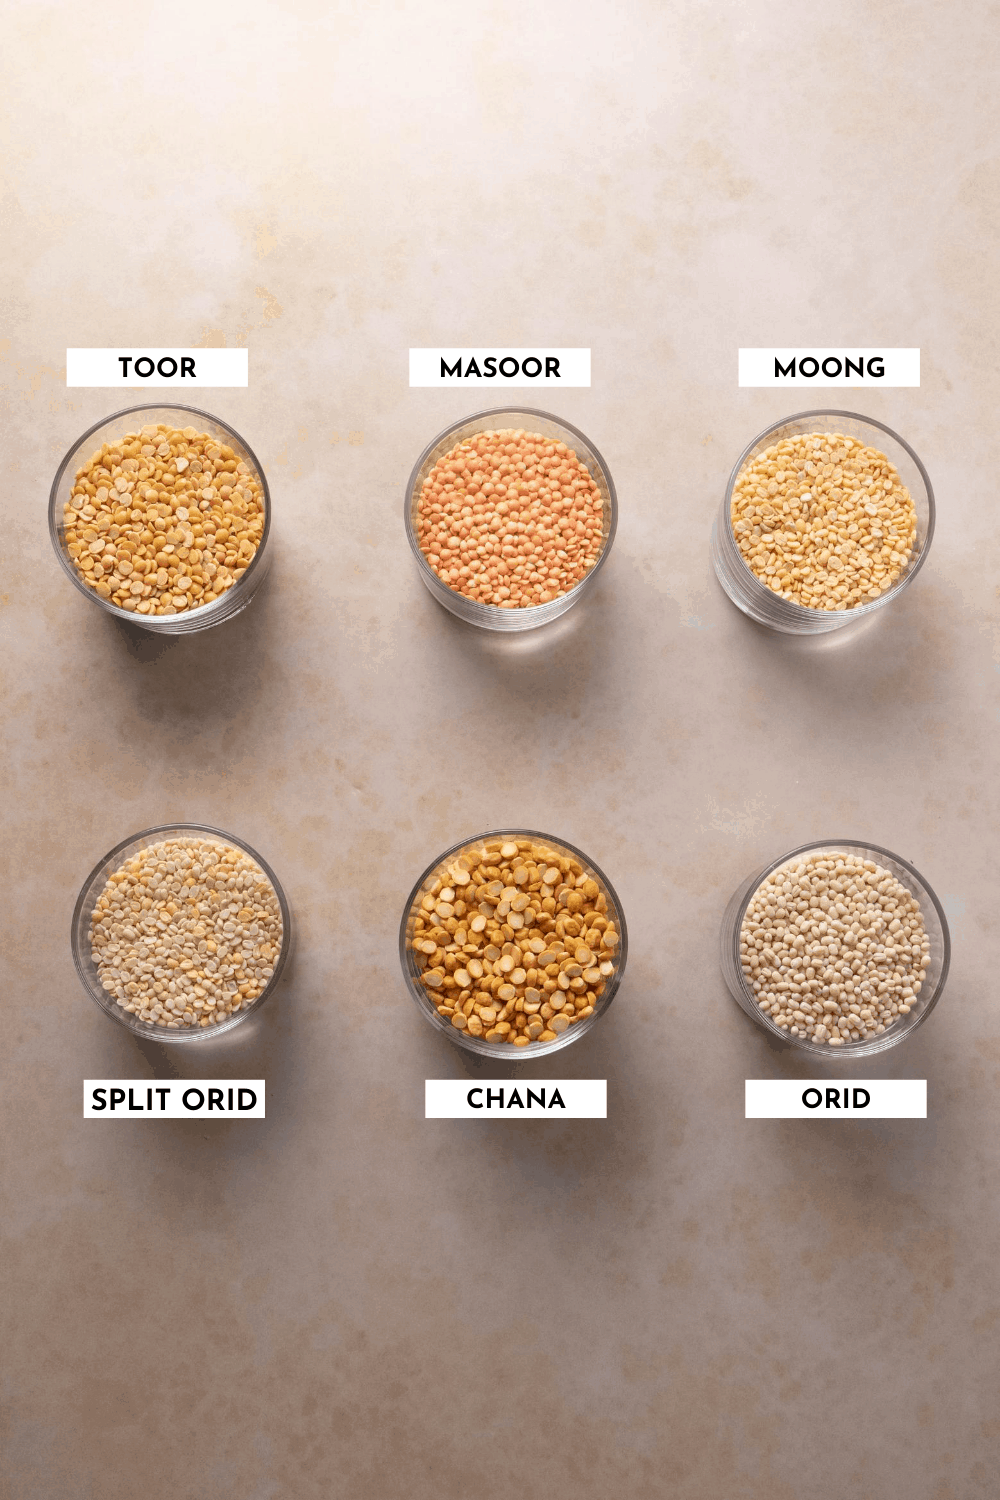 Labeled list of different types of lentils showing the physical difference